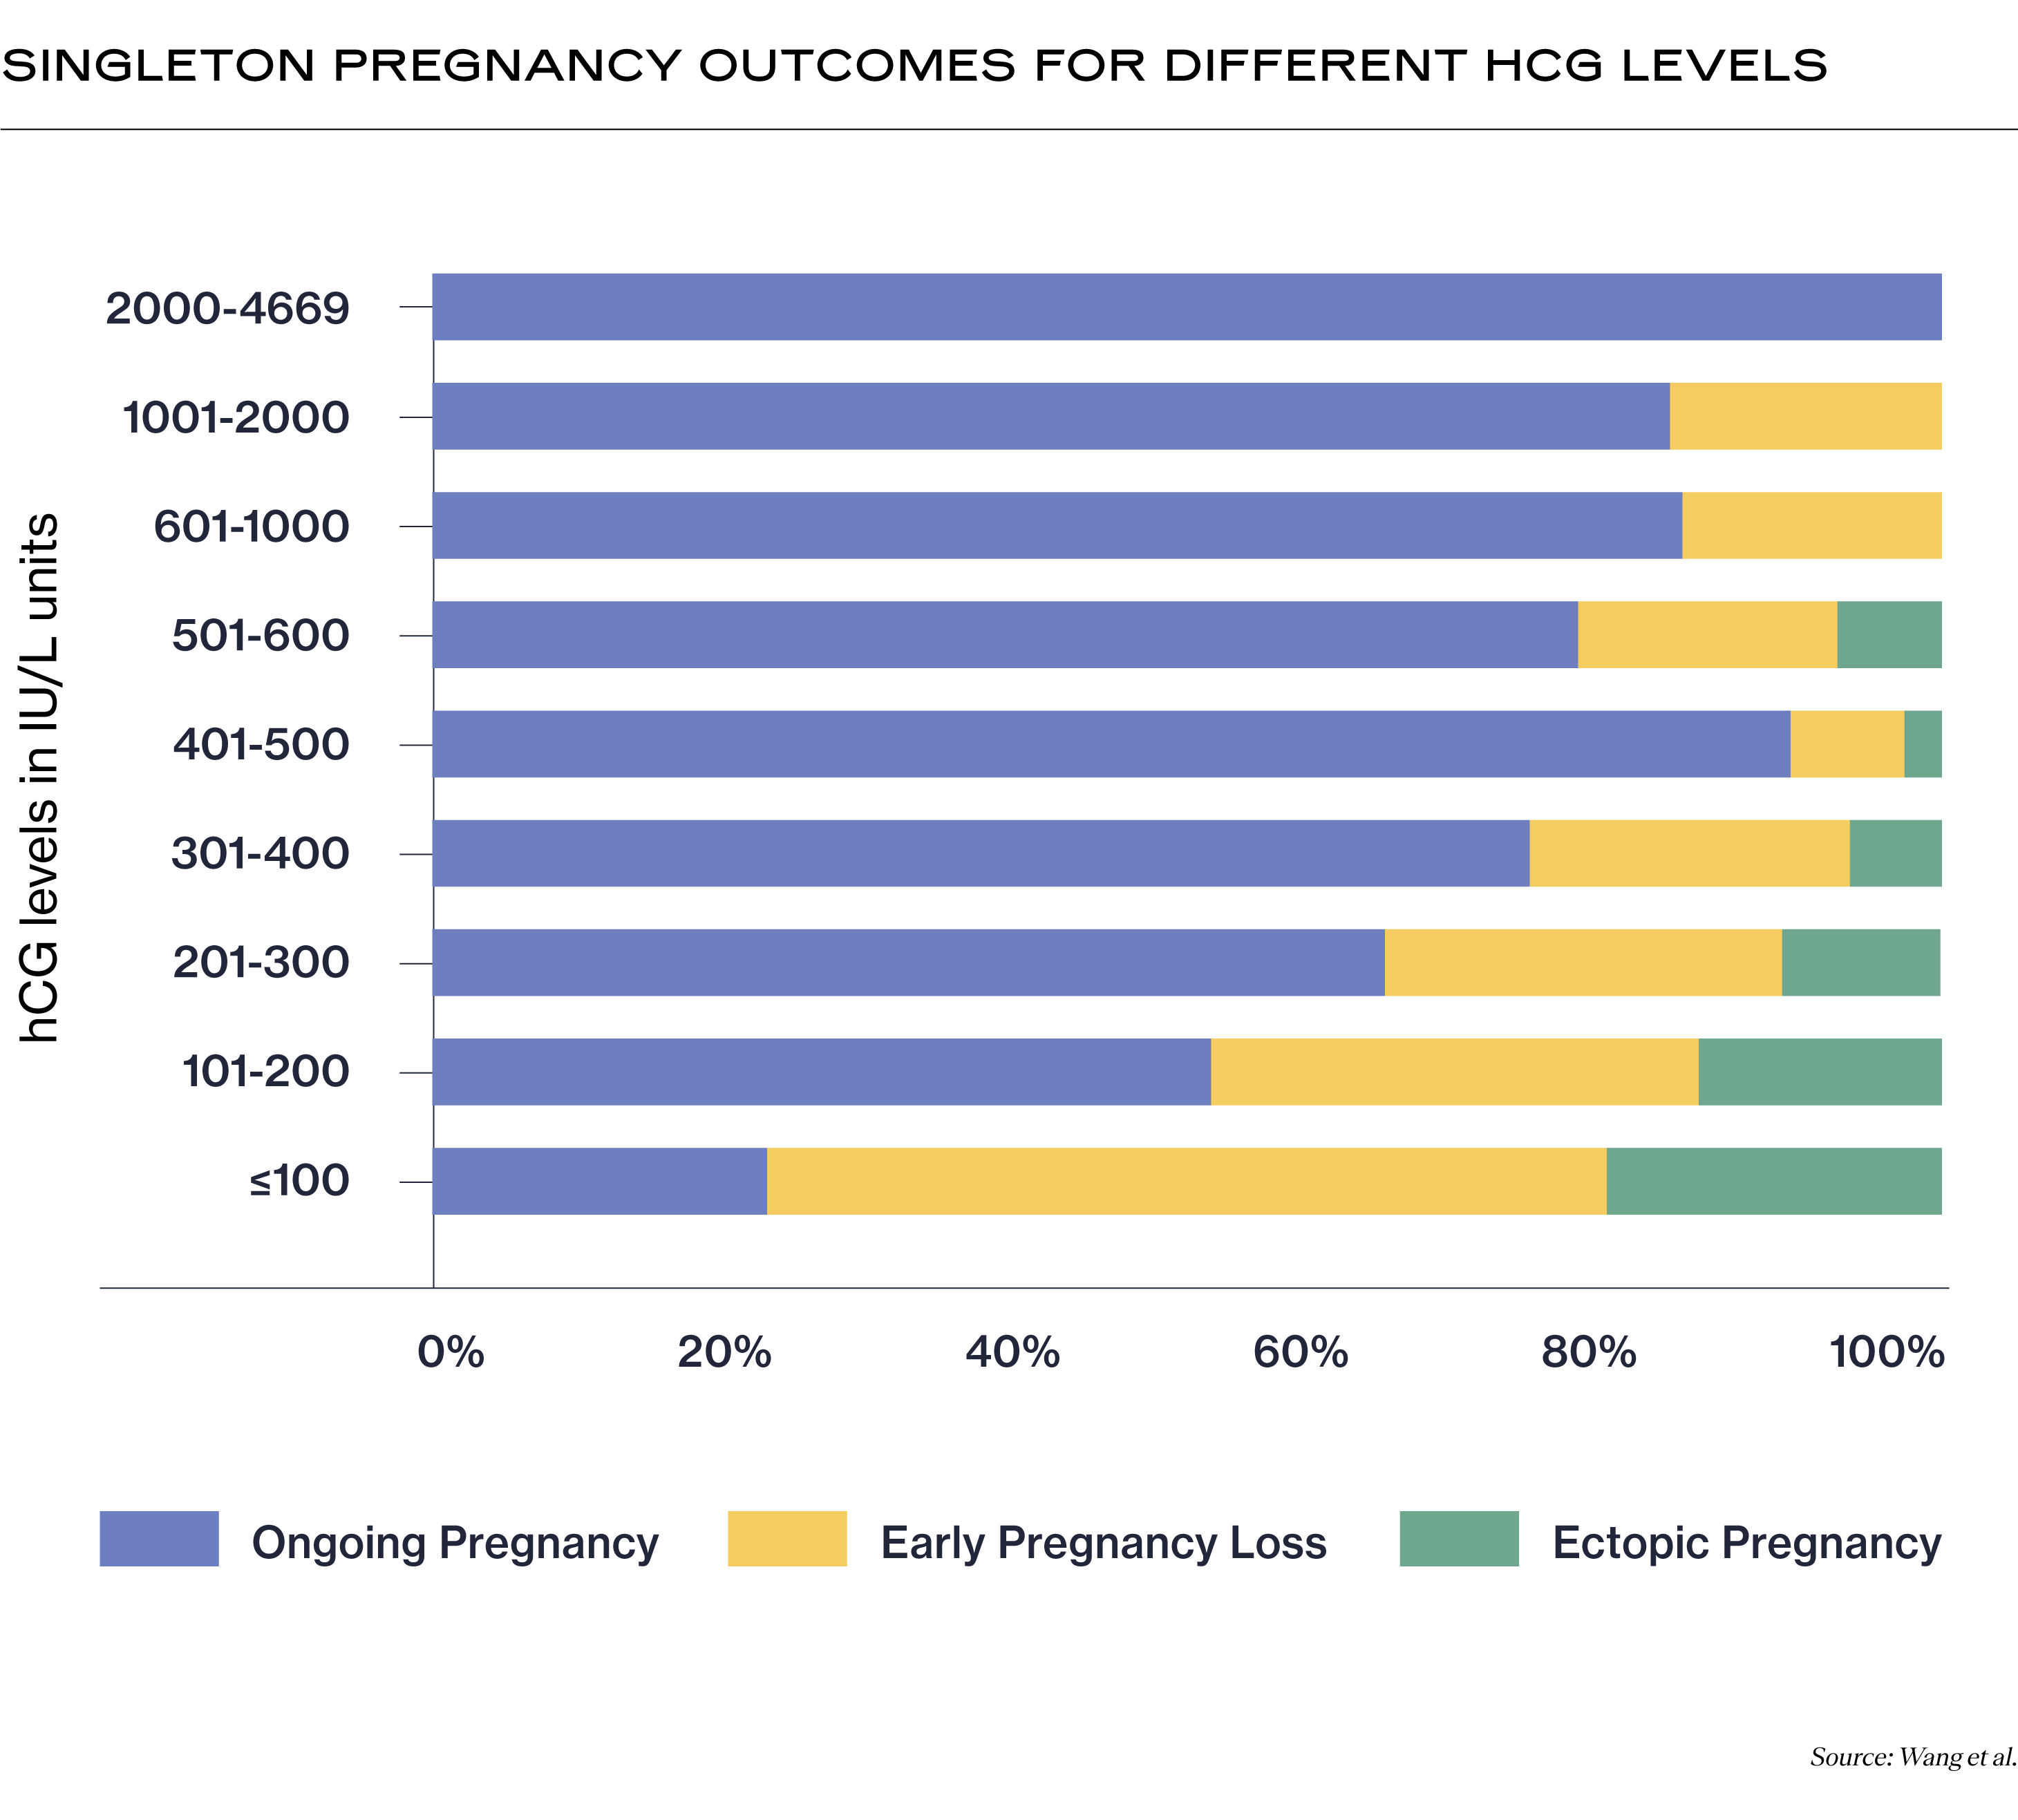 Singleton Pregnancy Outcomes for Different HCG Levels